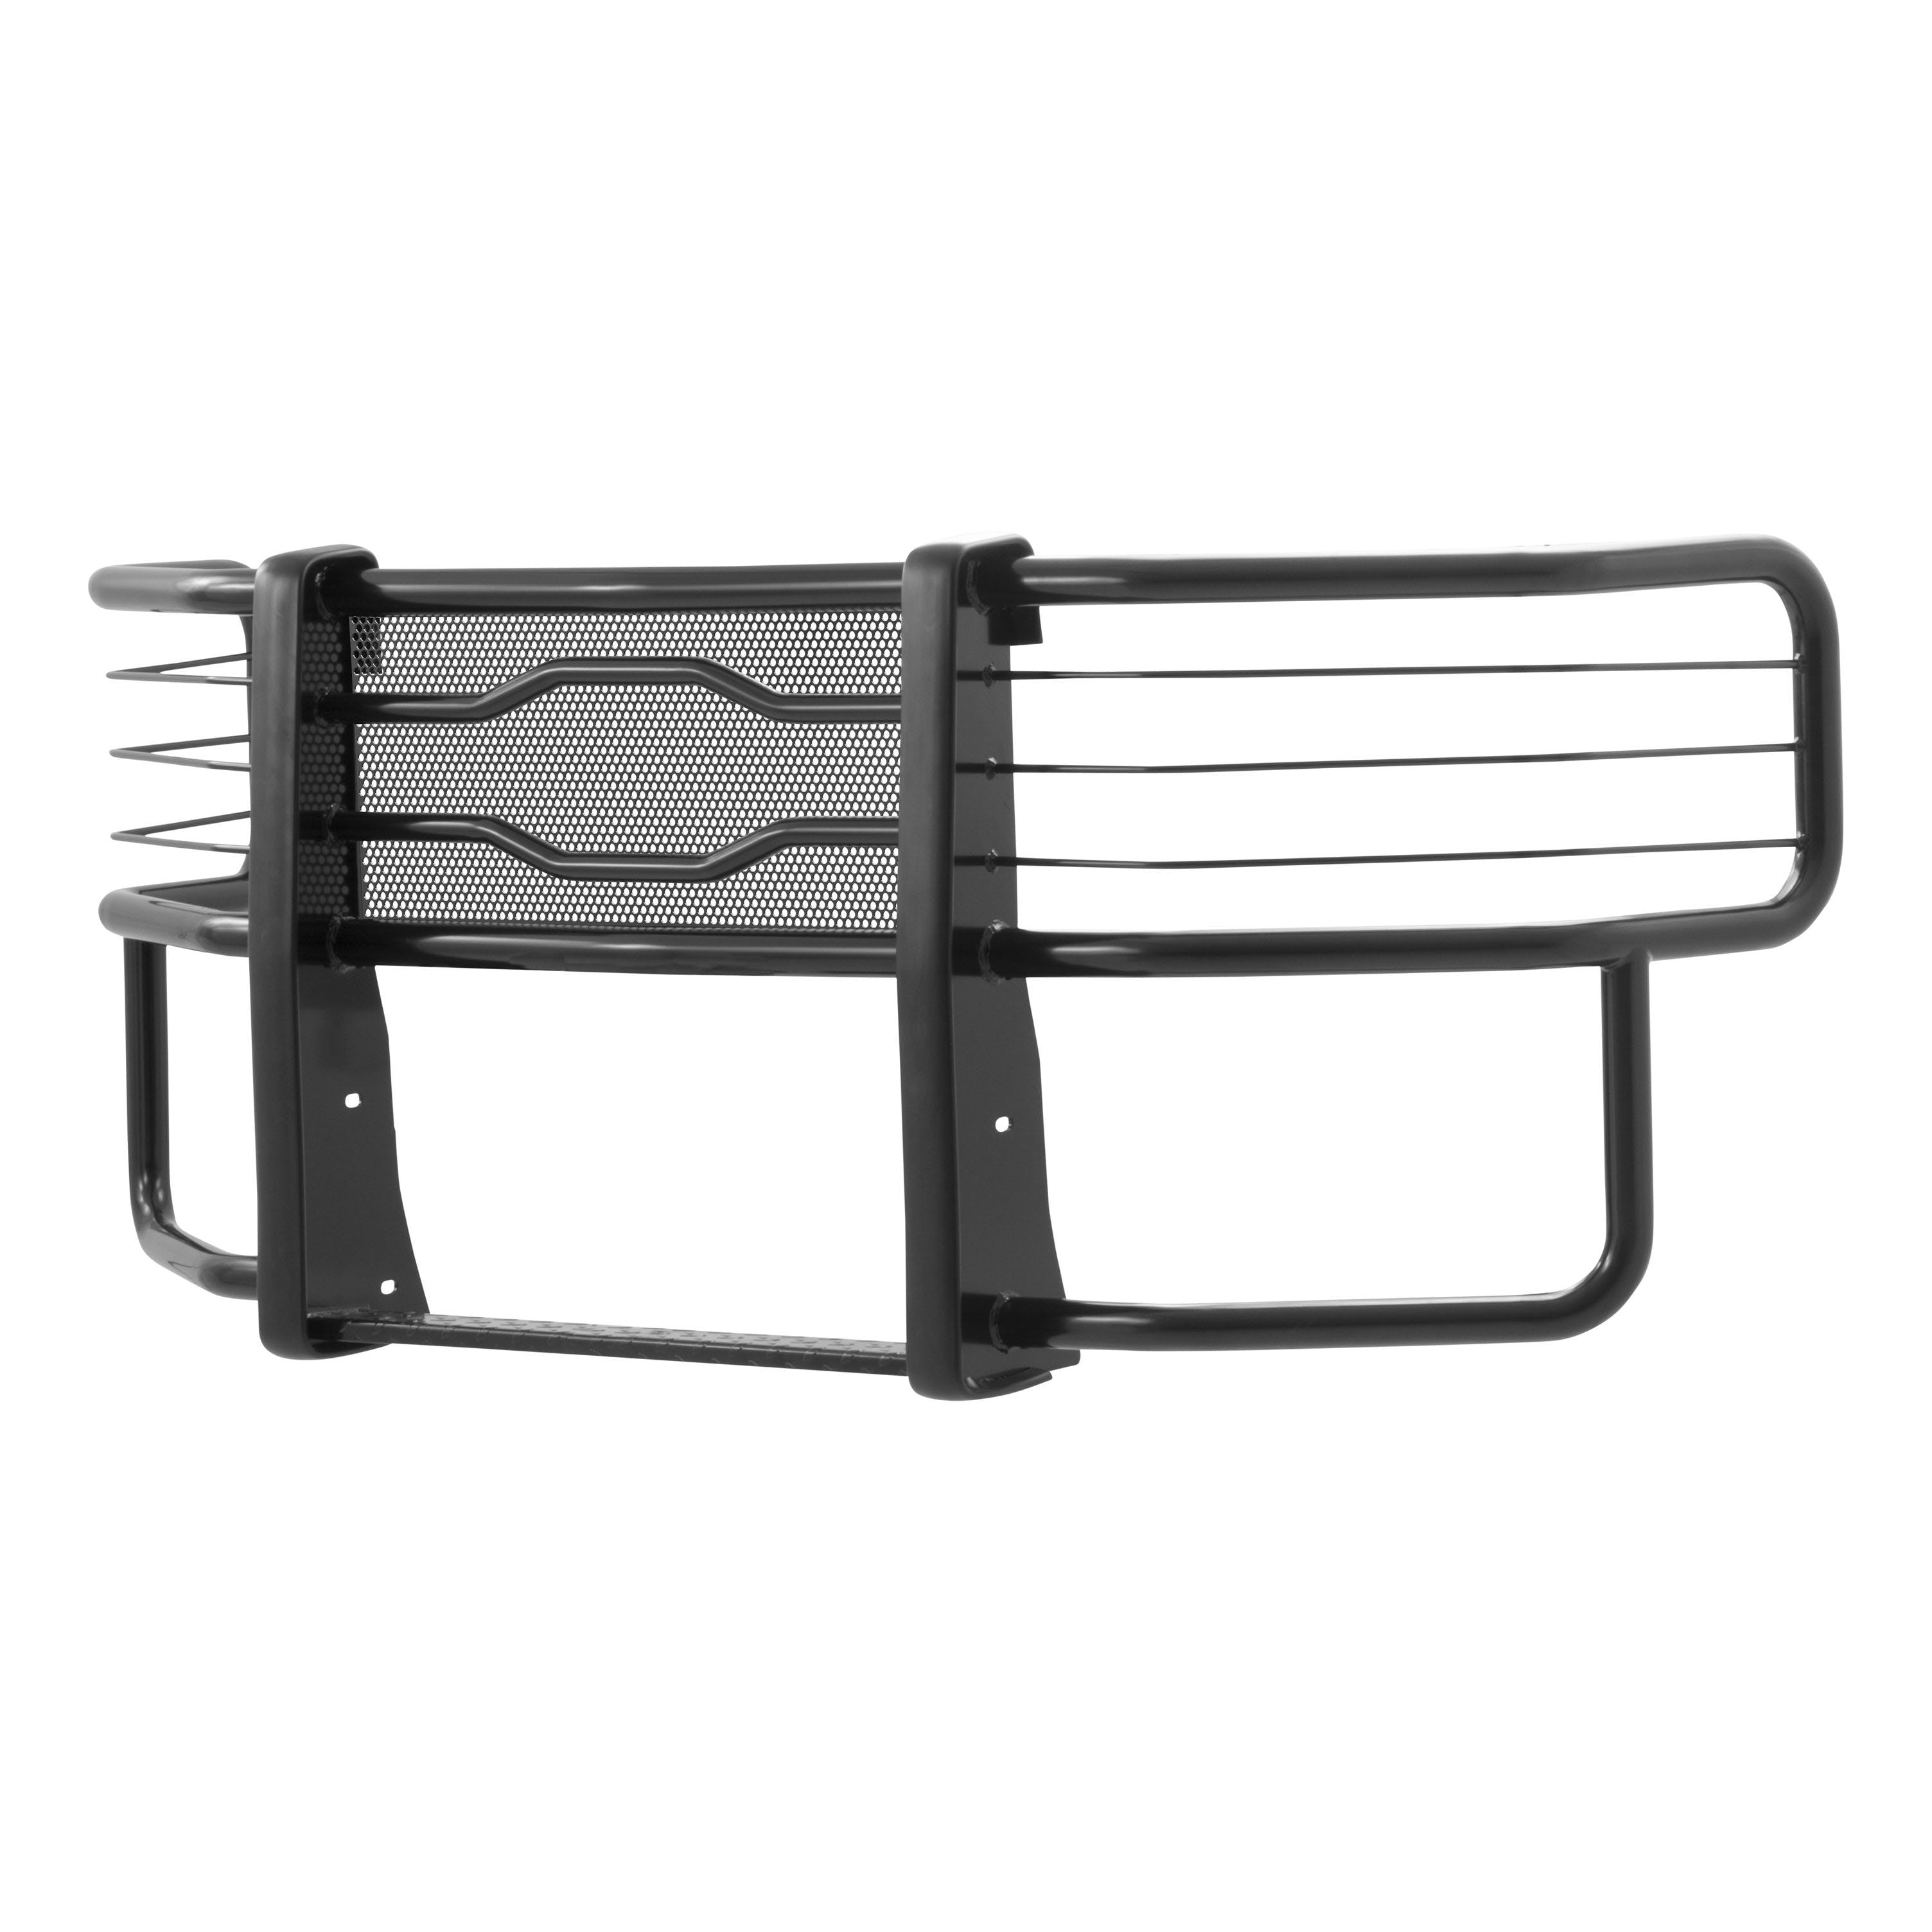 LUVERNE 320713 Prowler Max Grille Guard